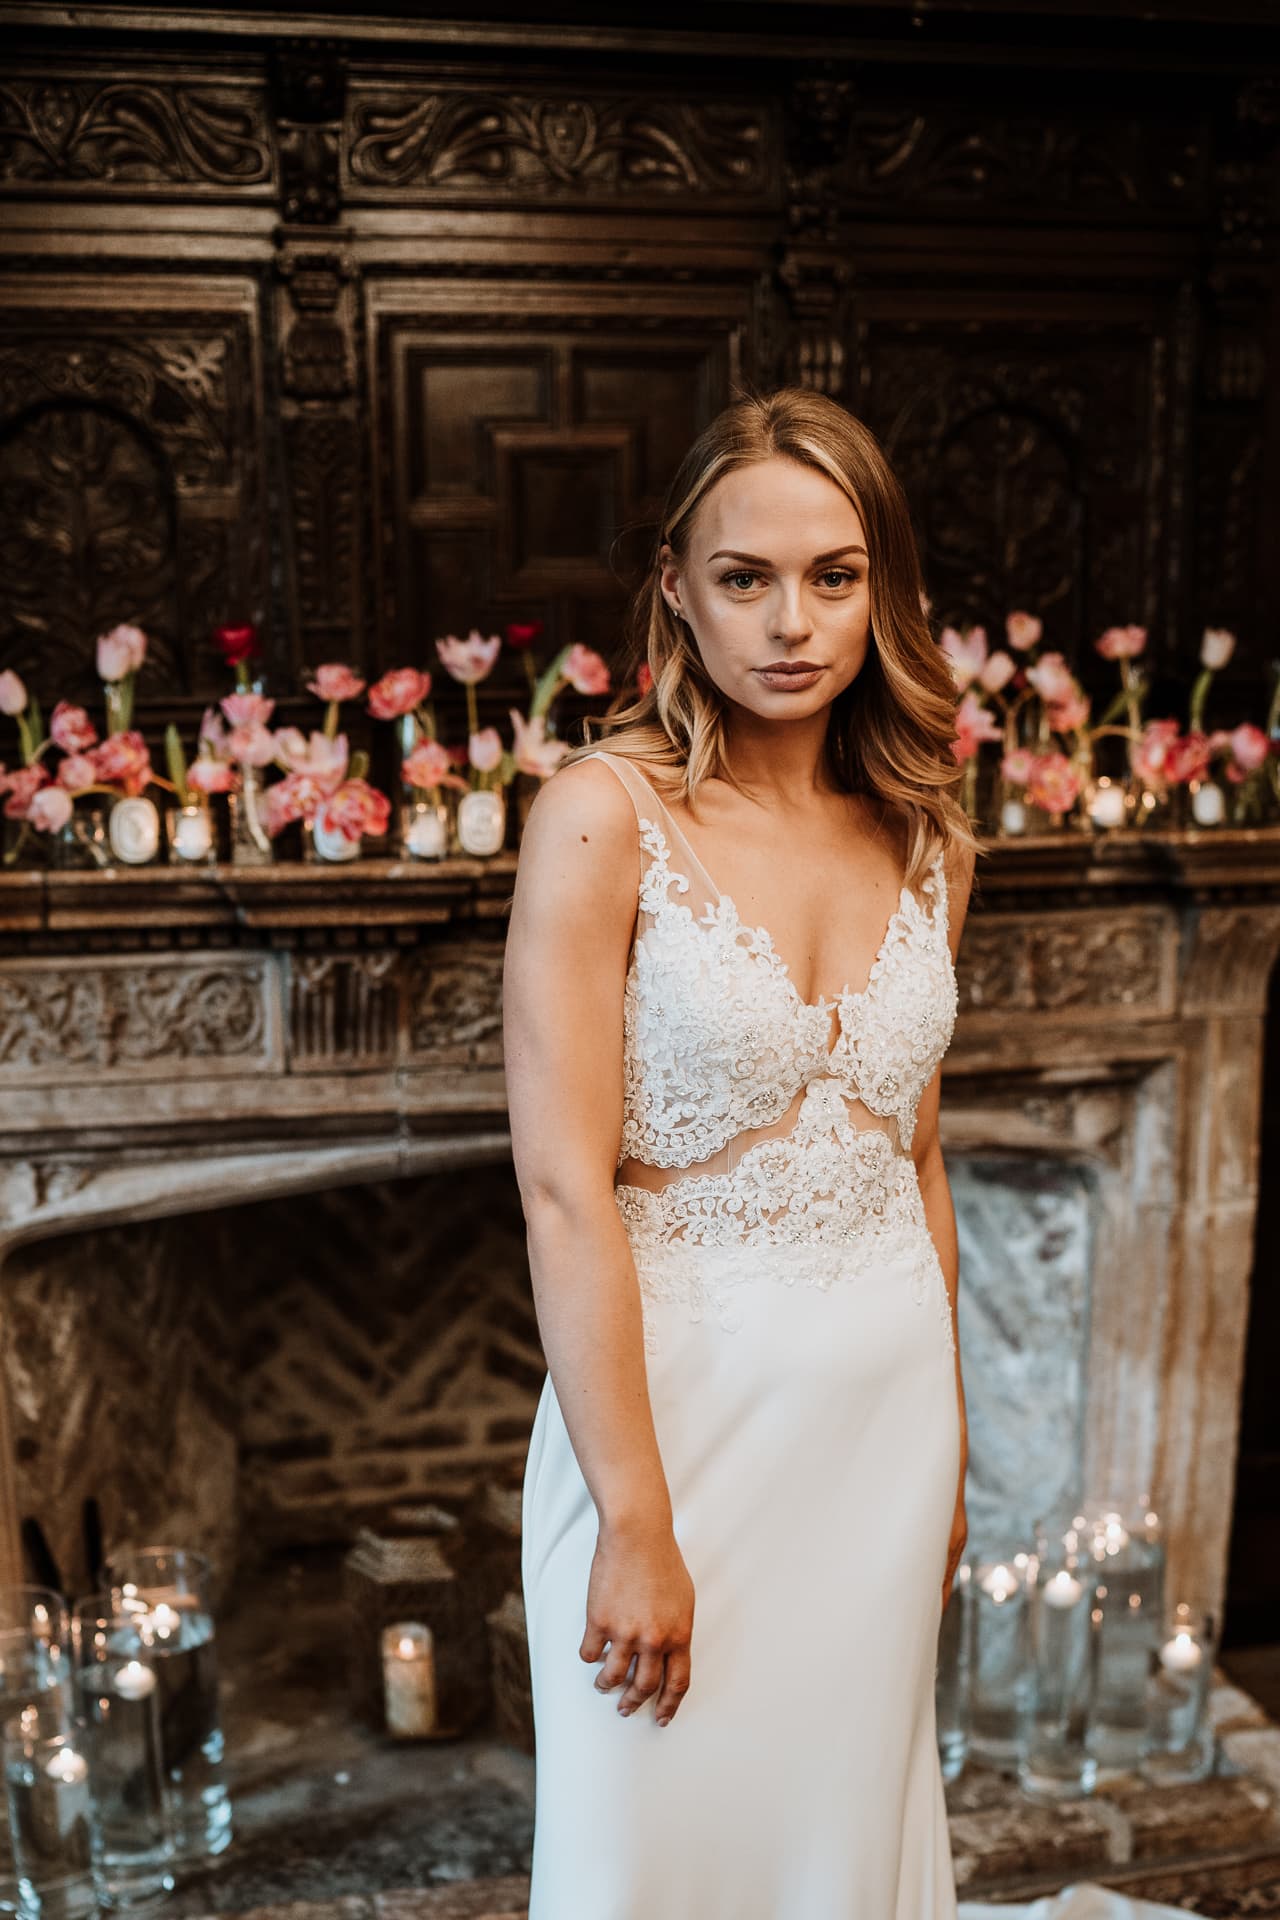 Stunning Bride in front of Bishop of Bayeux fireplace at Eastwell Manor